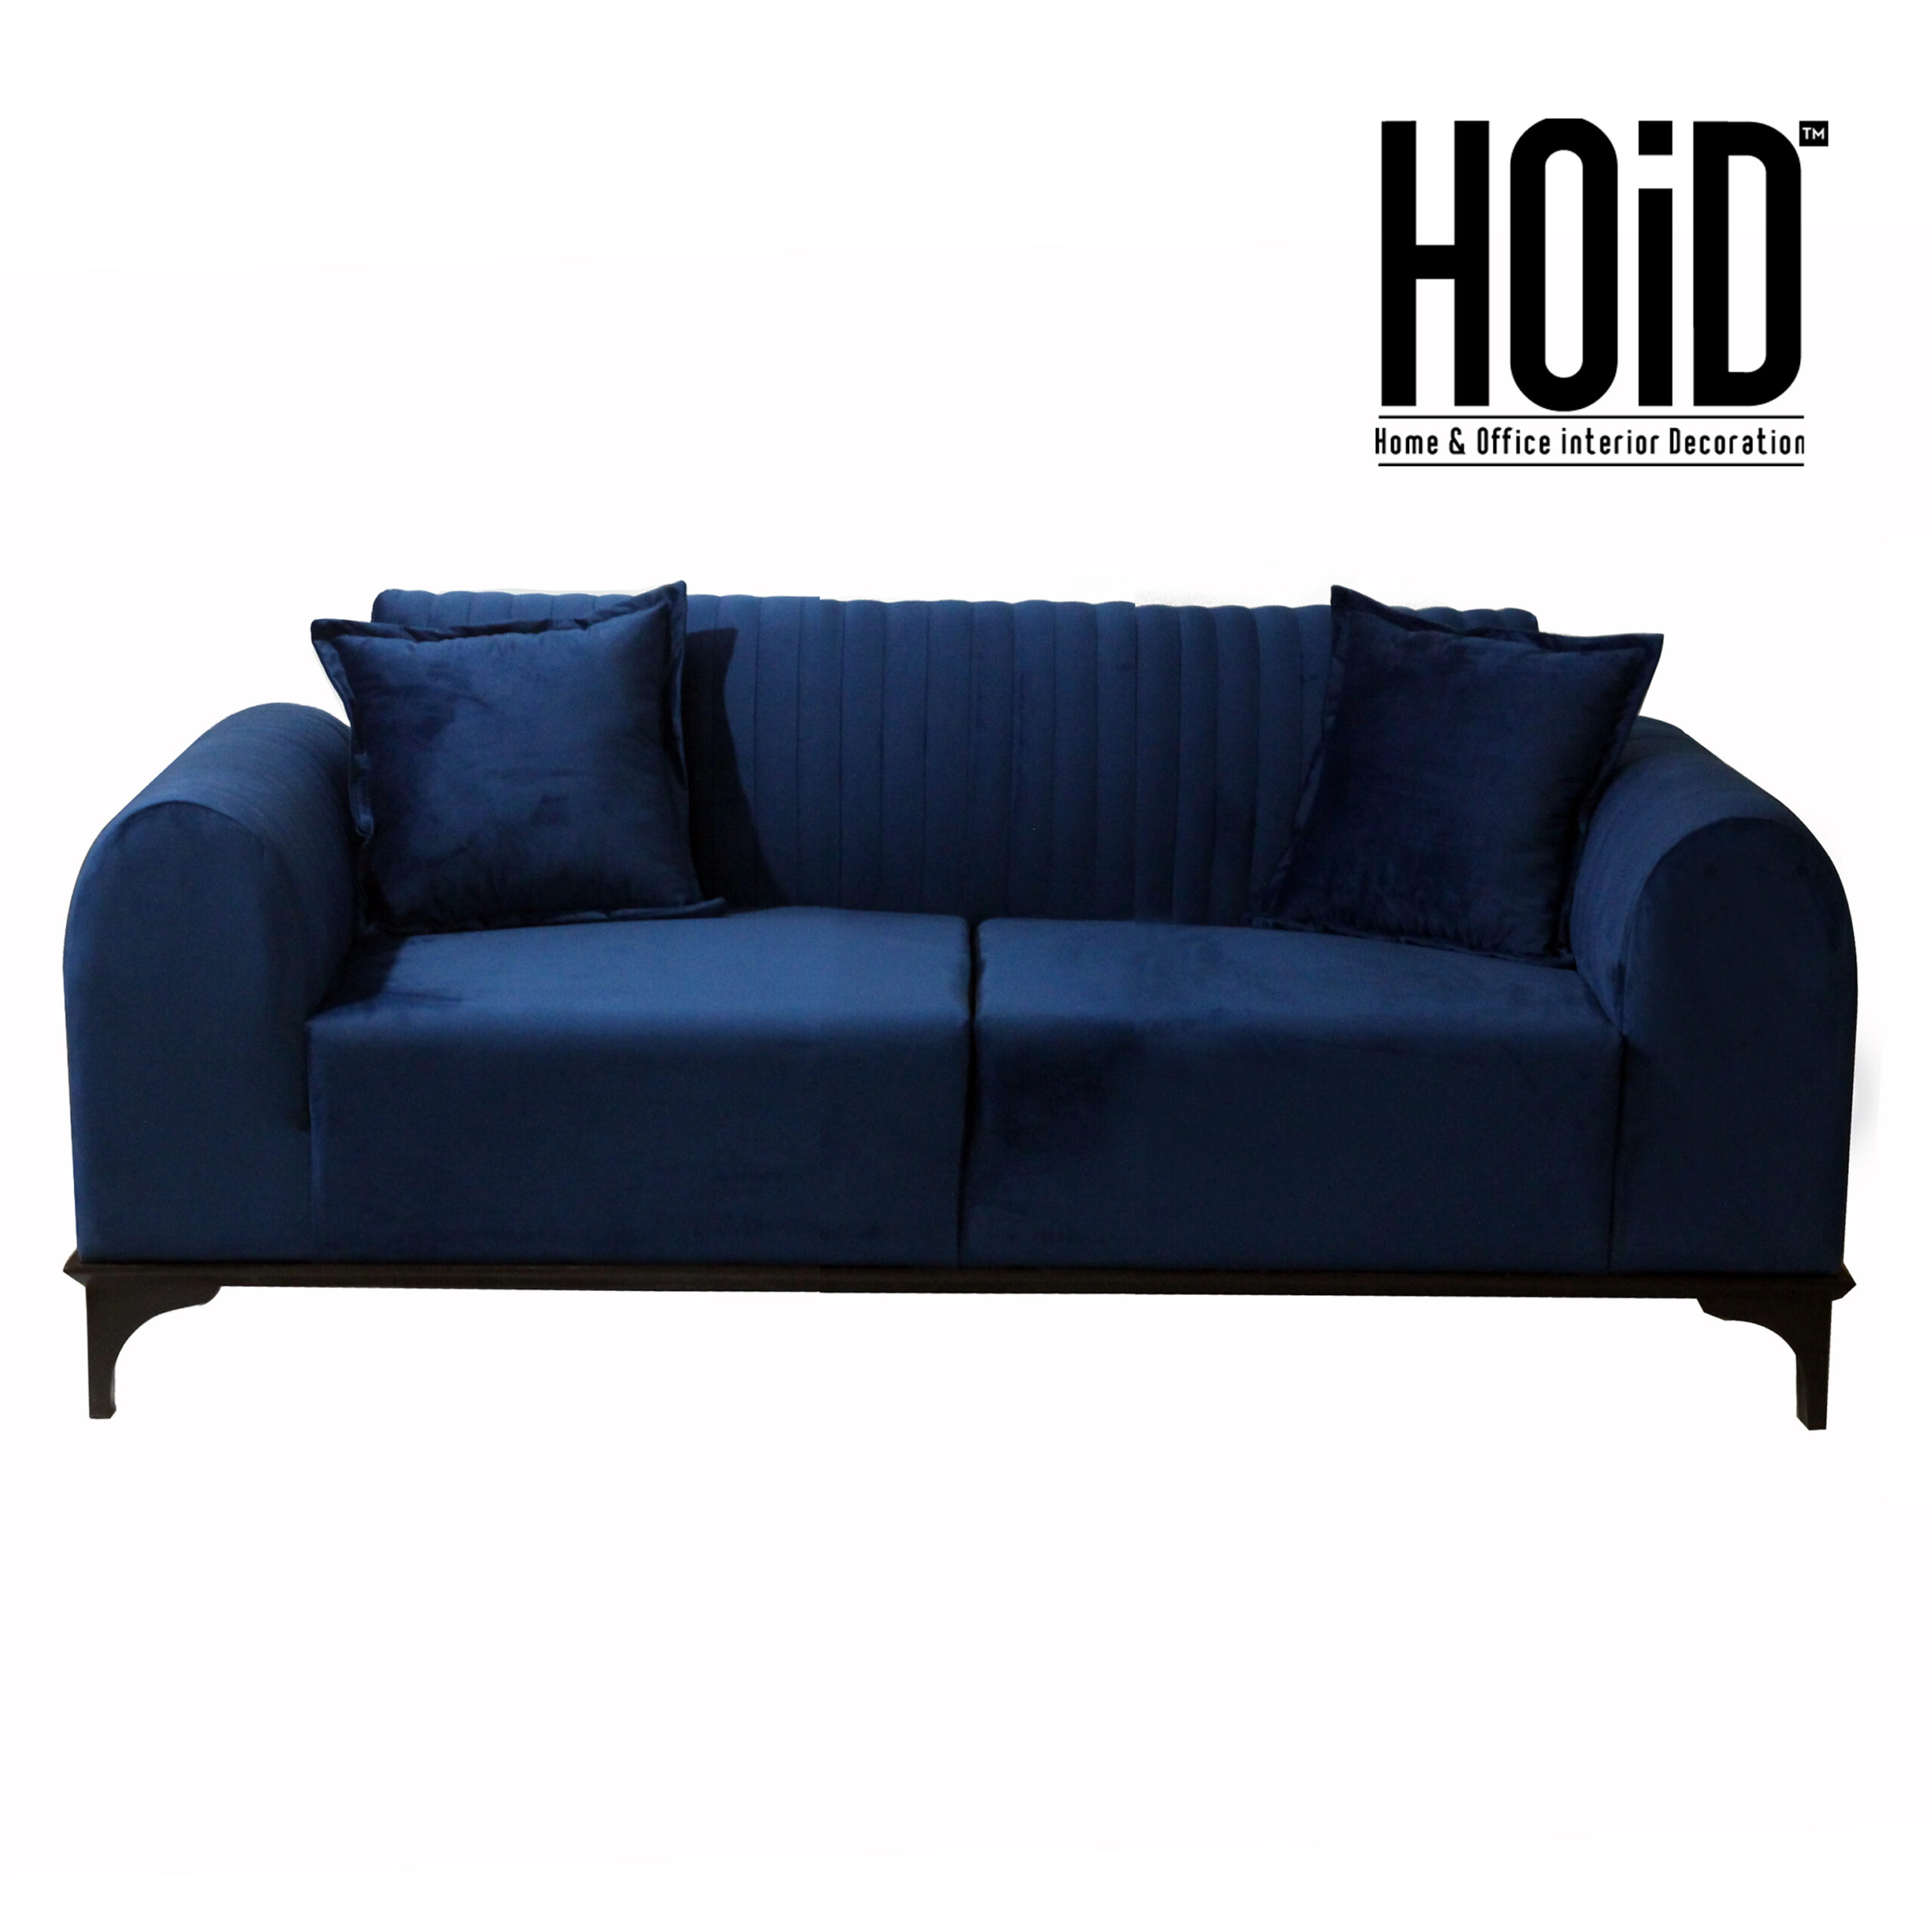 bumby-2-seater-sofa-in-blue-color-scaled-2.jpg